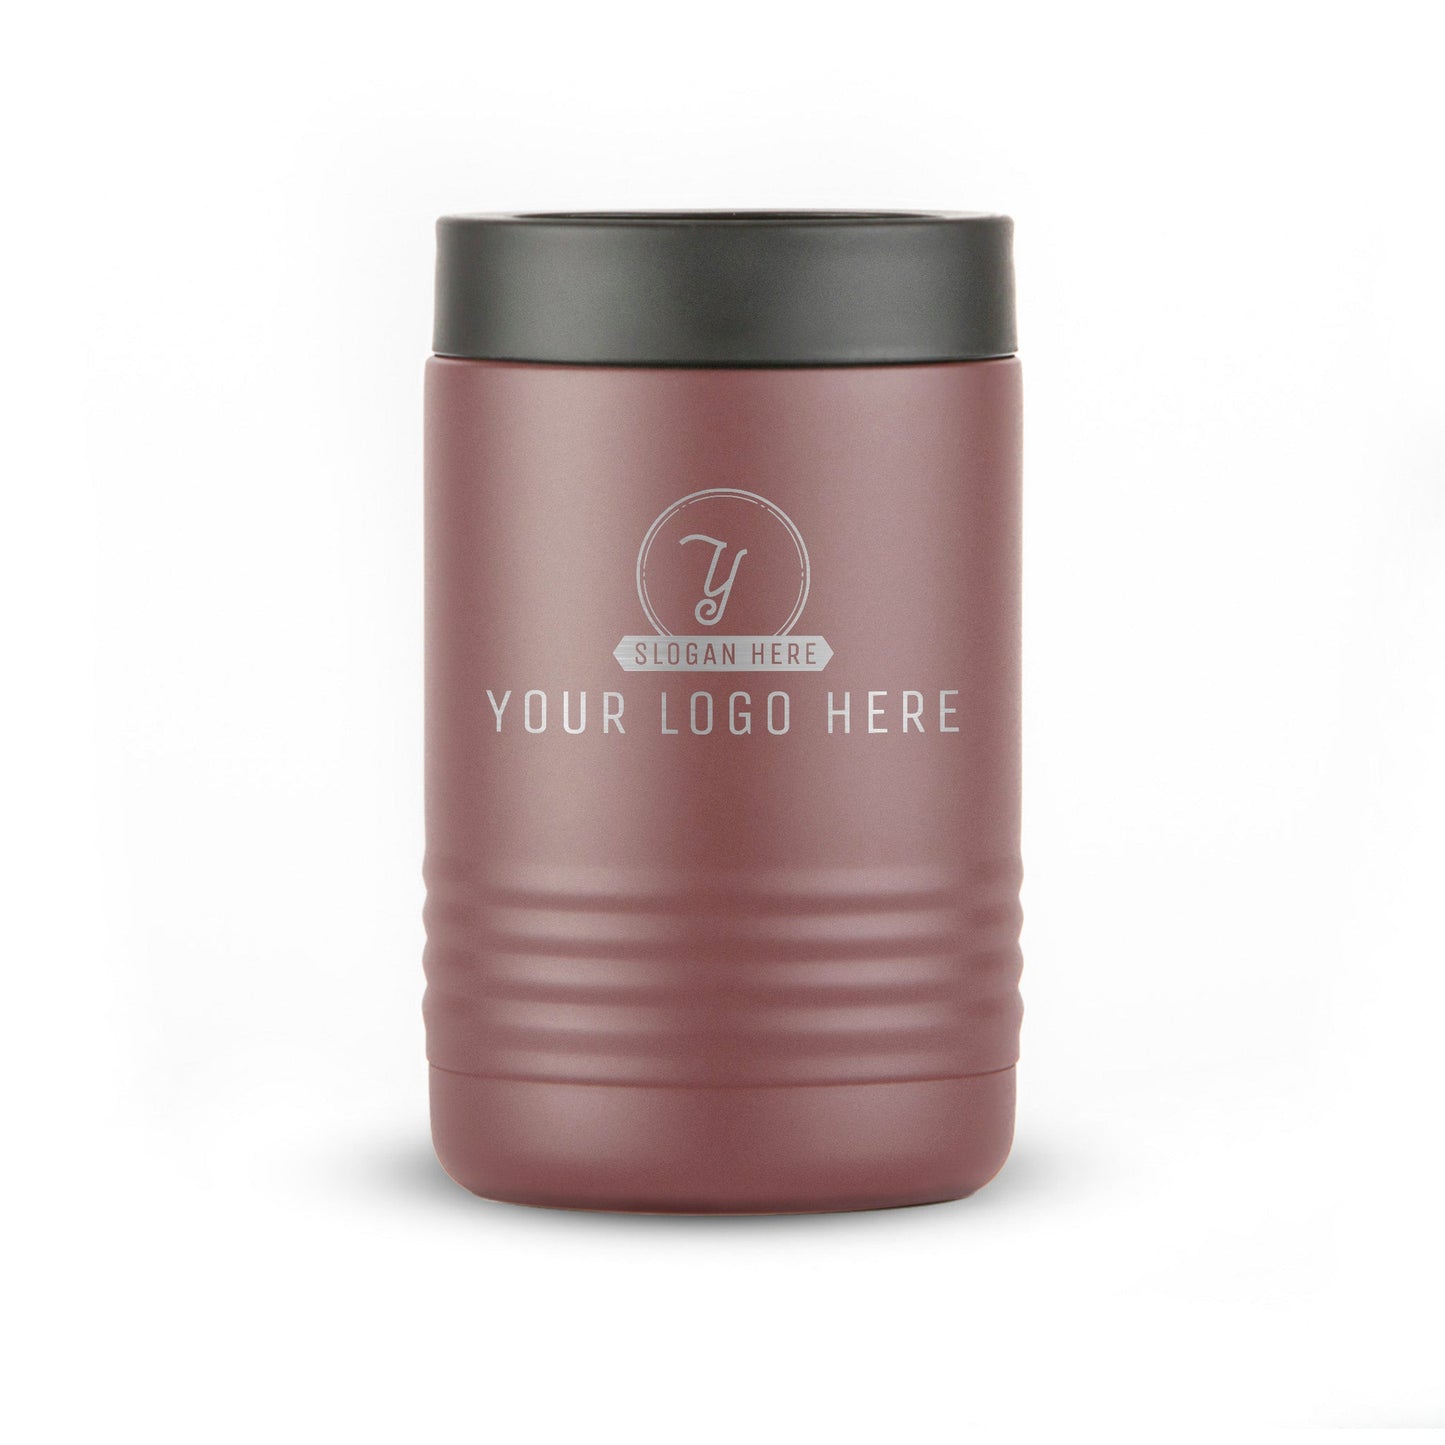 Wholesale Customized 12oz Insulated Beverage Holder - Etchified-Etchified-WH_LBH33